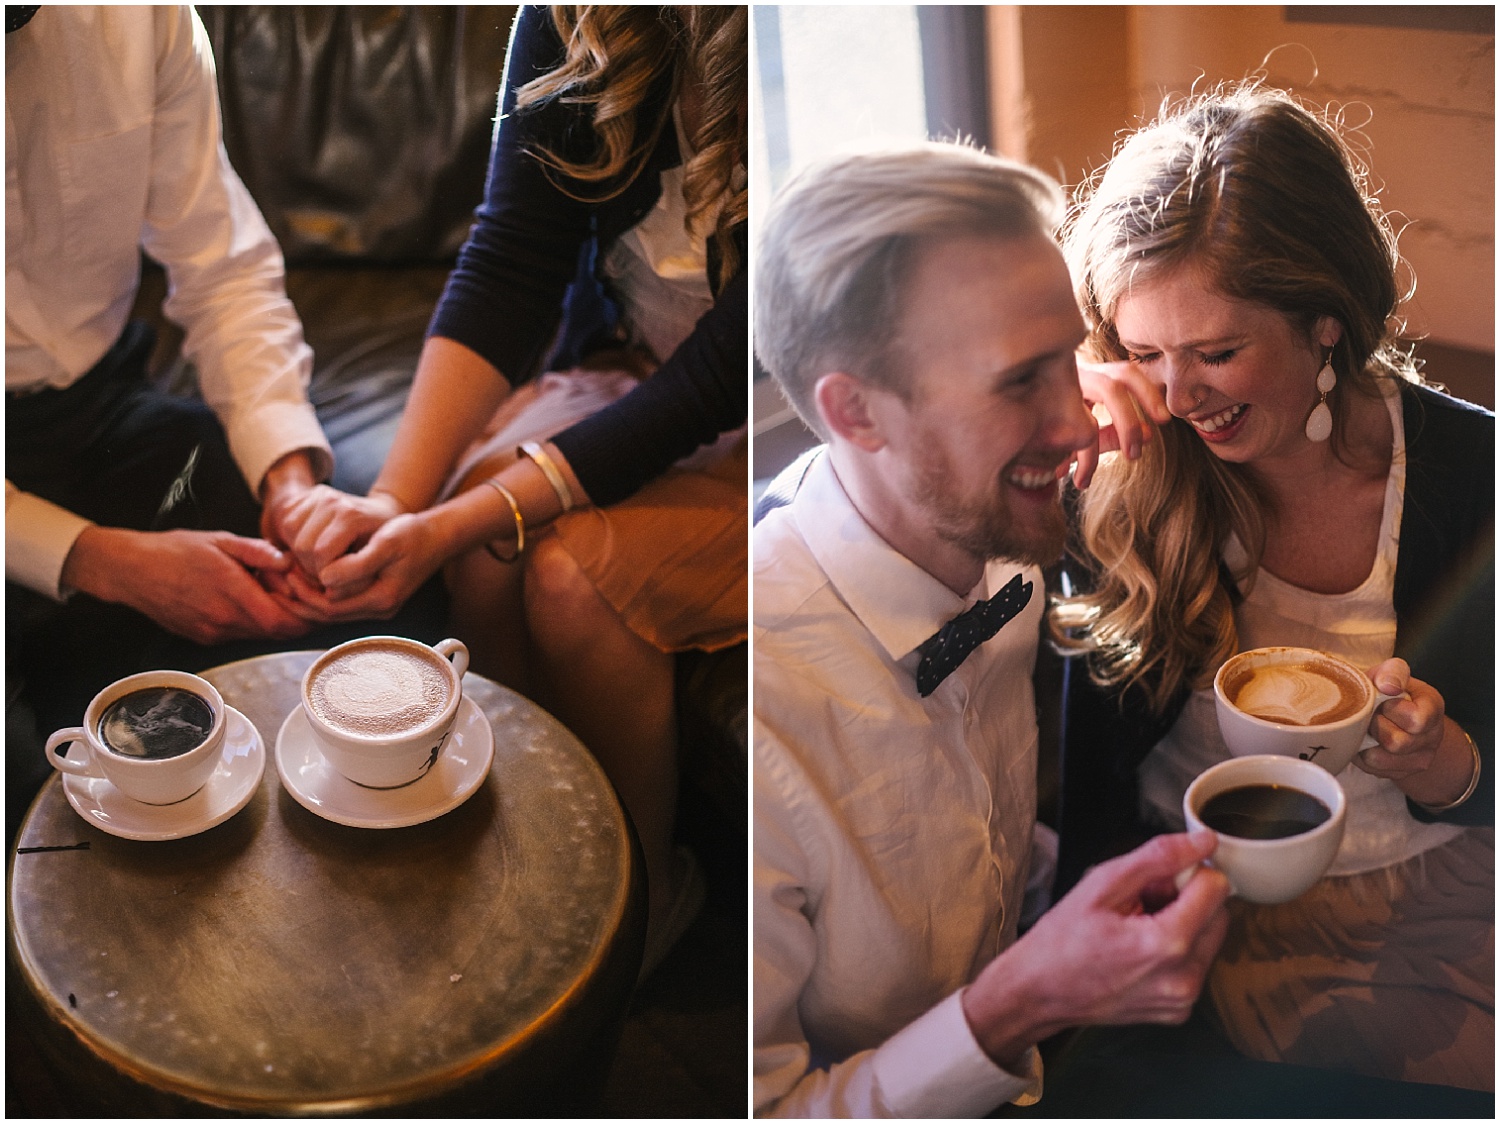 Tips for choosing the location for your engagement pictures: go to your favorite local coffee shop.